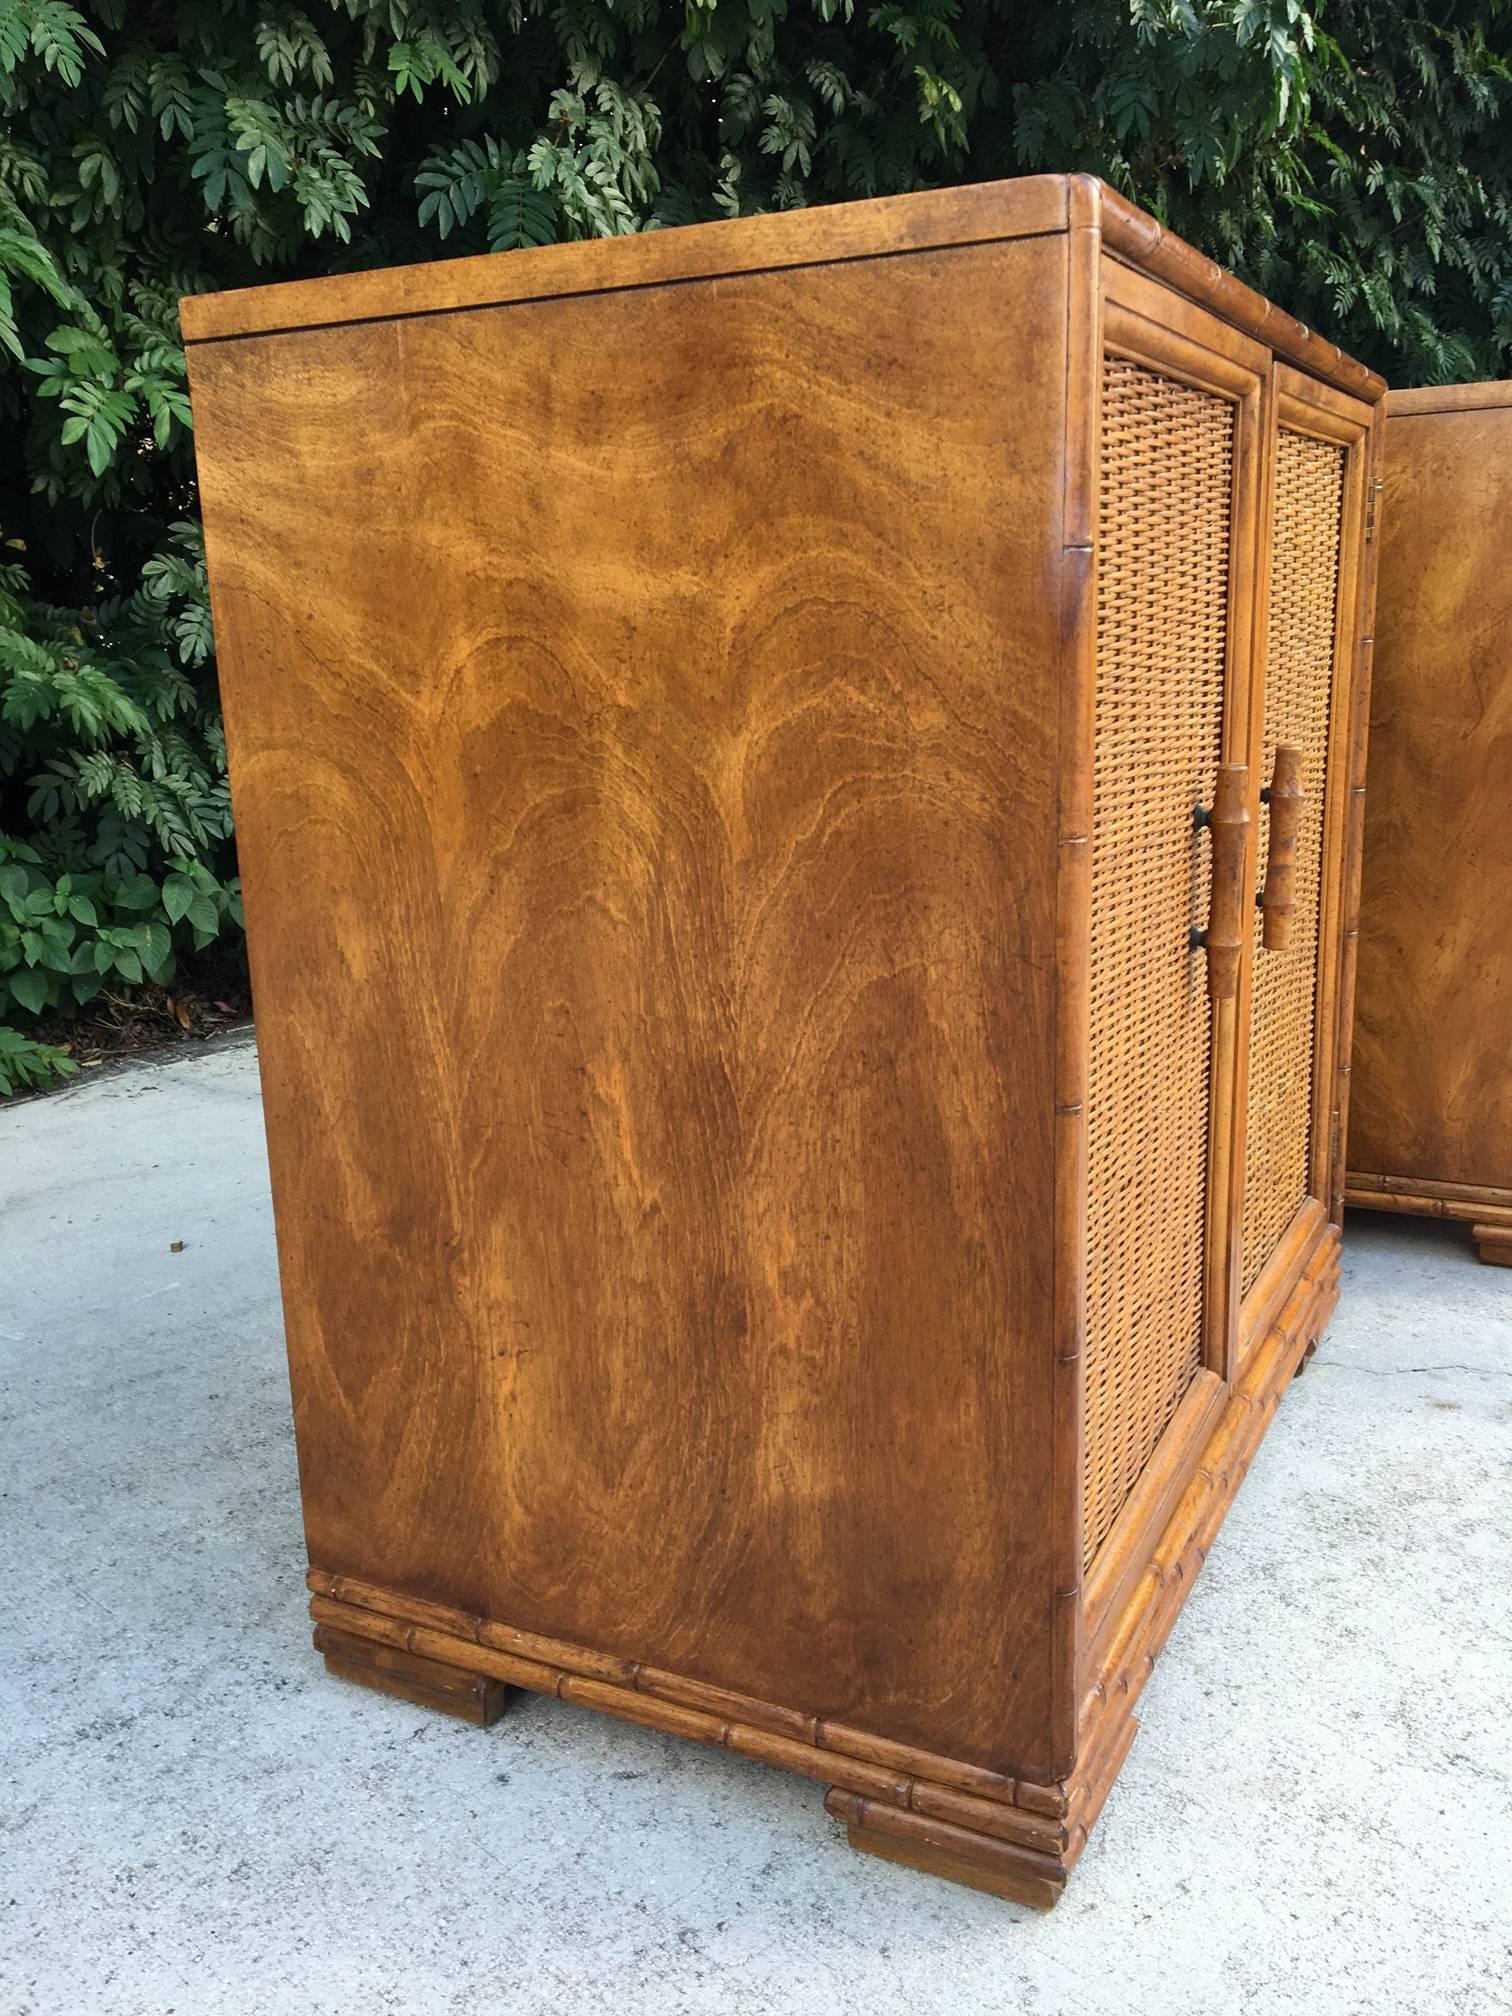 Pair of matching rattan cabinets featuring bamboo handles and trim. Large storage area with adjustable shelf. From Palm Beach to Boho, these would compliment any style decor. Could be used as nightstands as well. Excellent vintage condition.